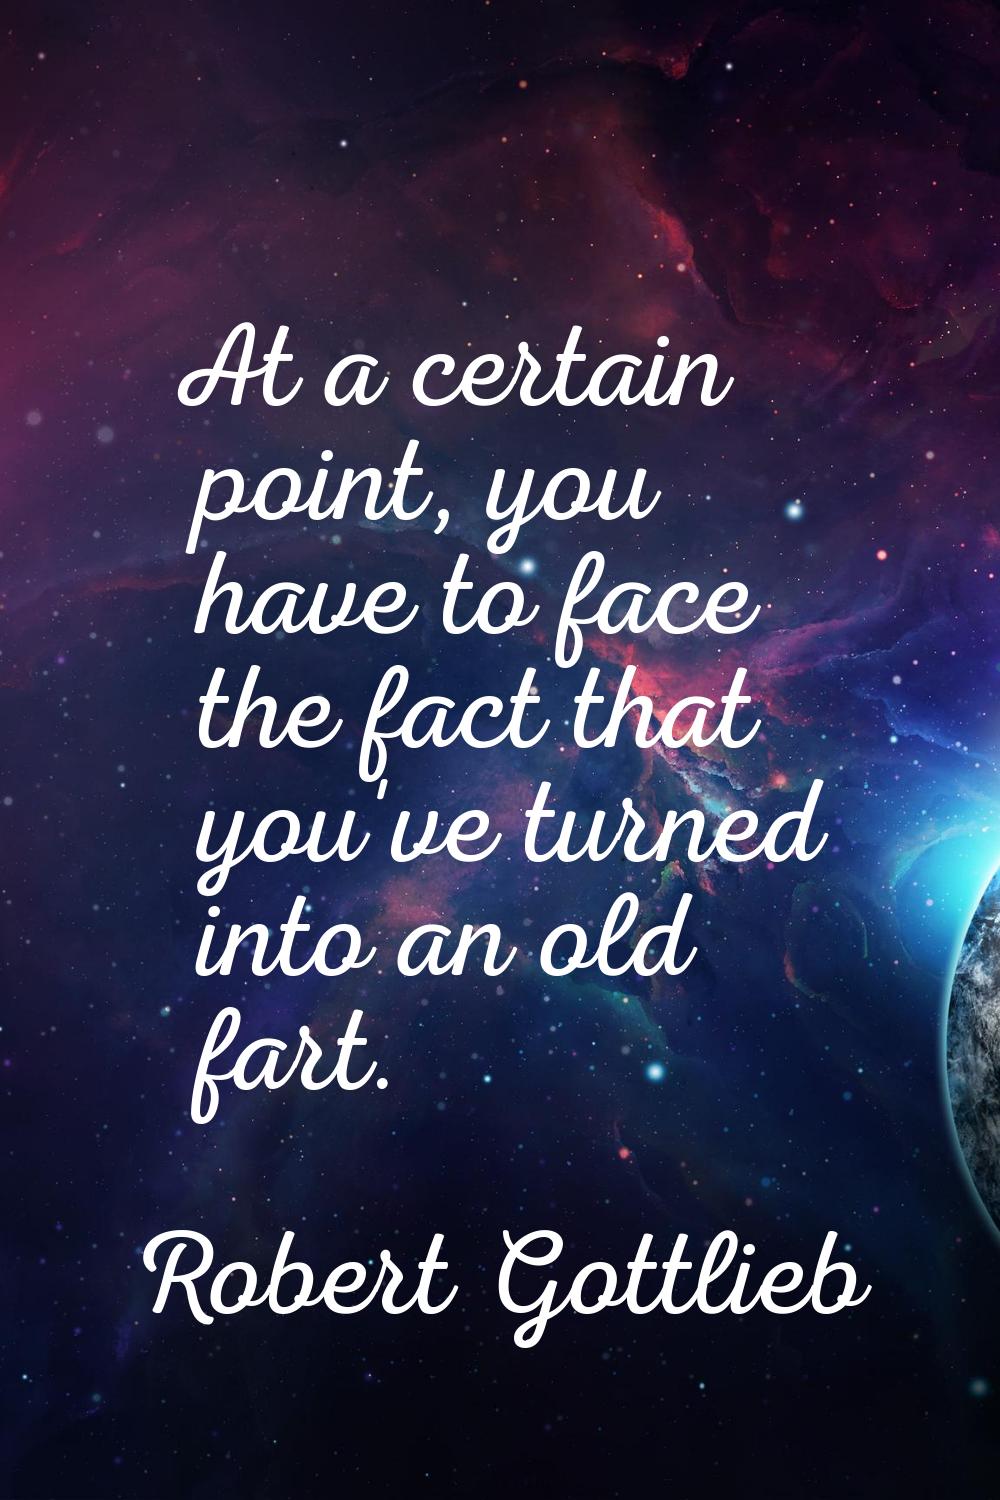 At a certain point, you have to face the fact that you've turned into an old fart.